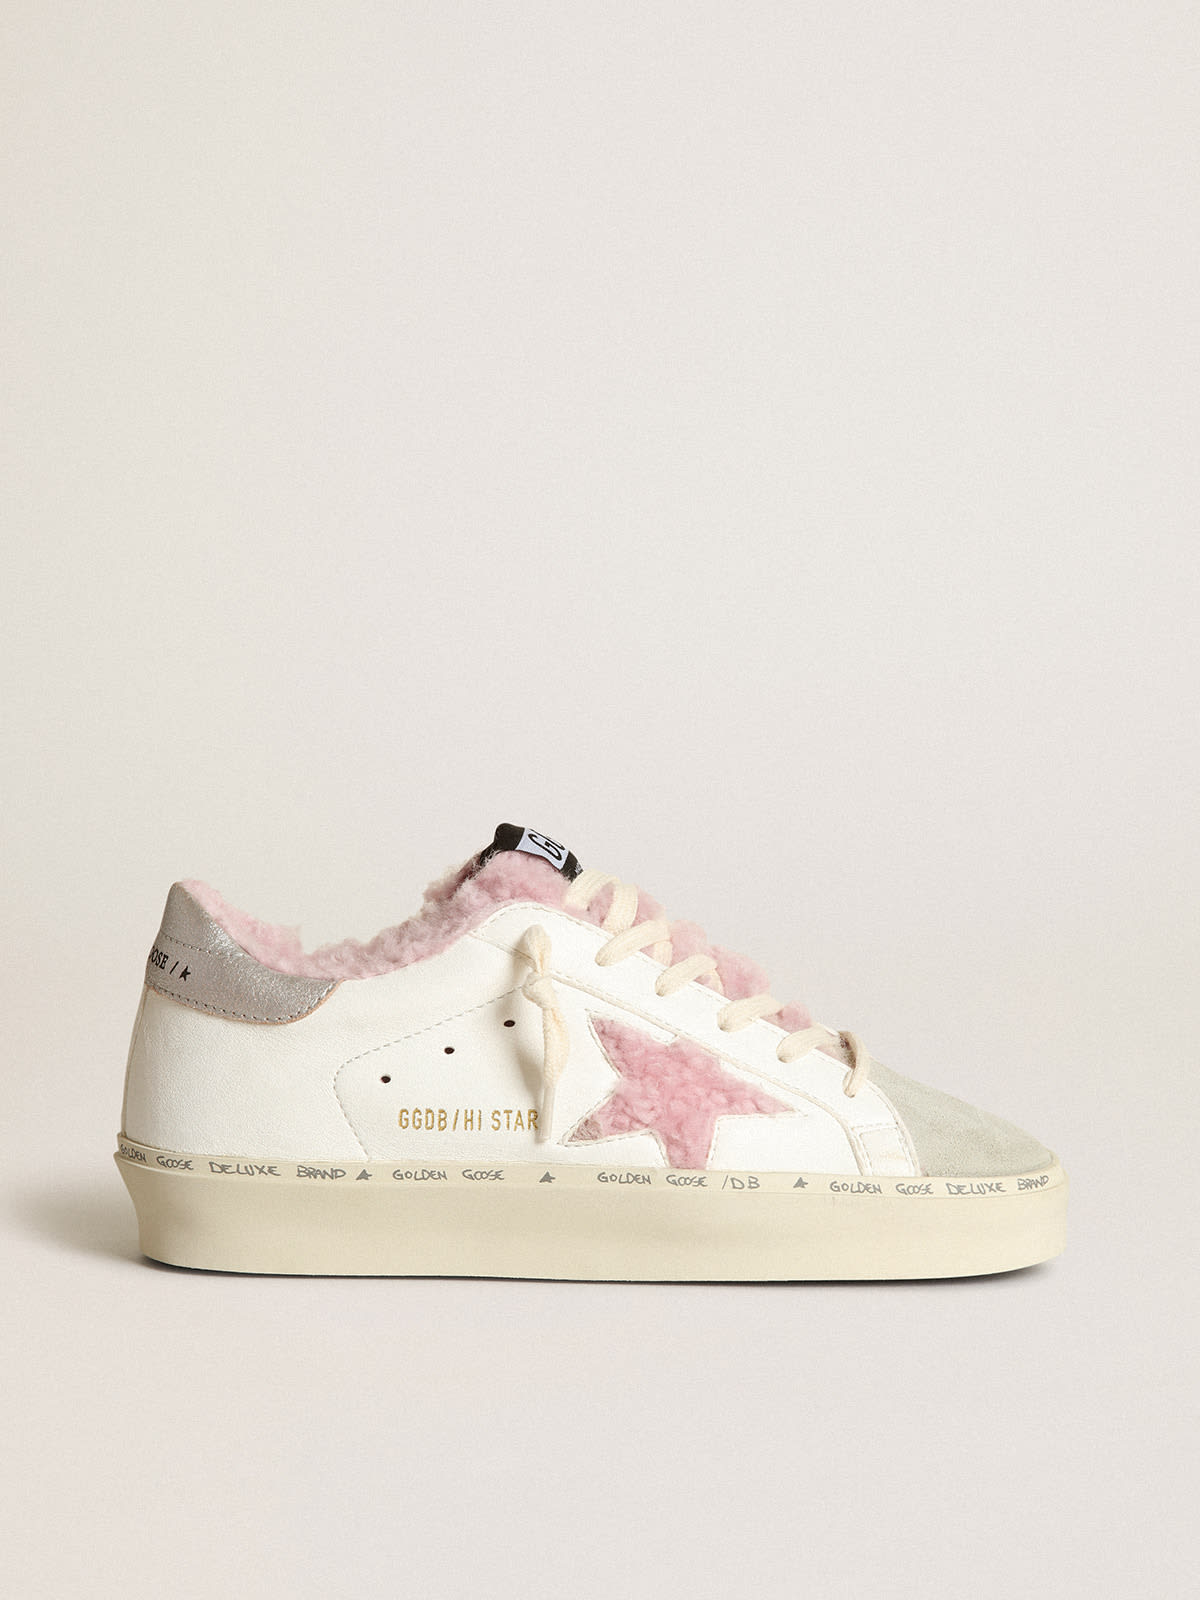 Golden Goose - Hi Star in white nappa with pink shearling star and lining in 